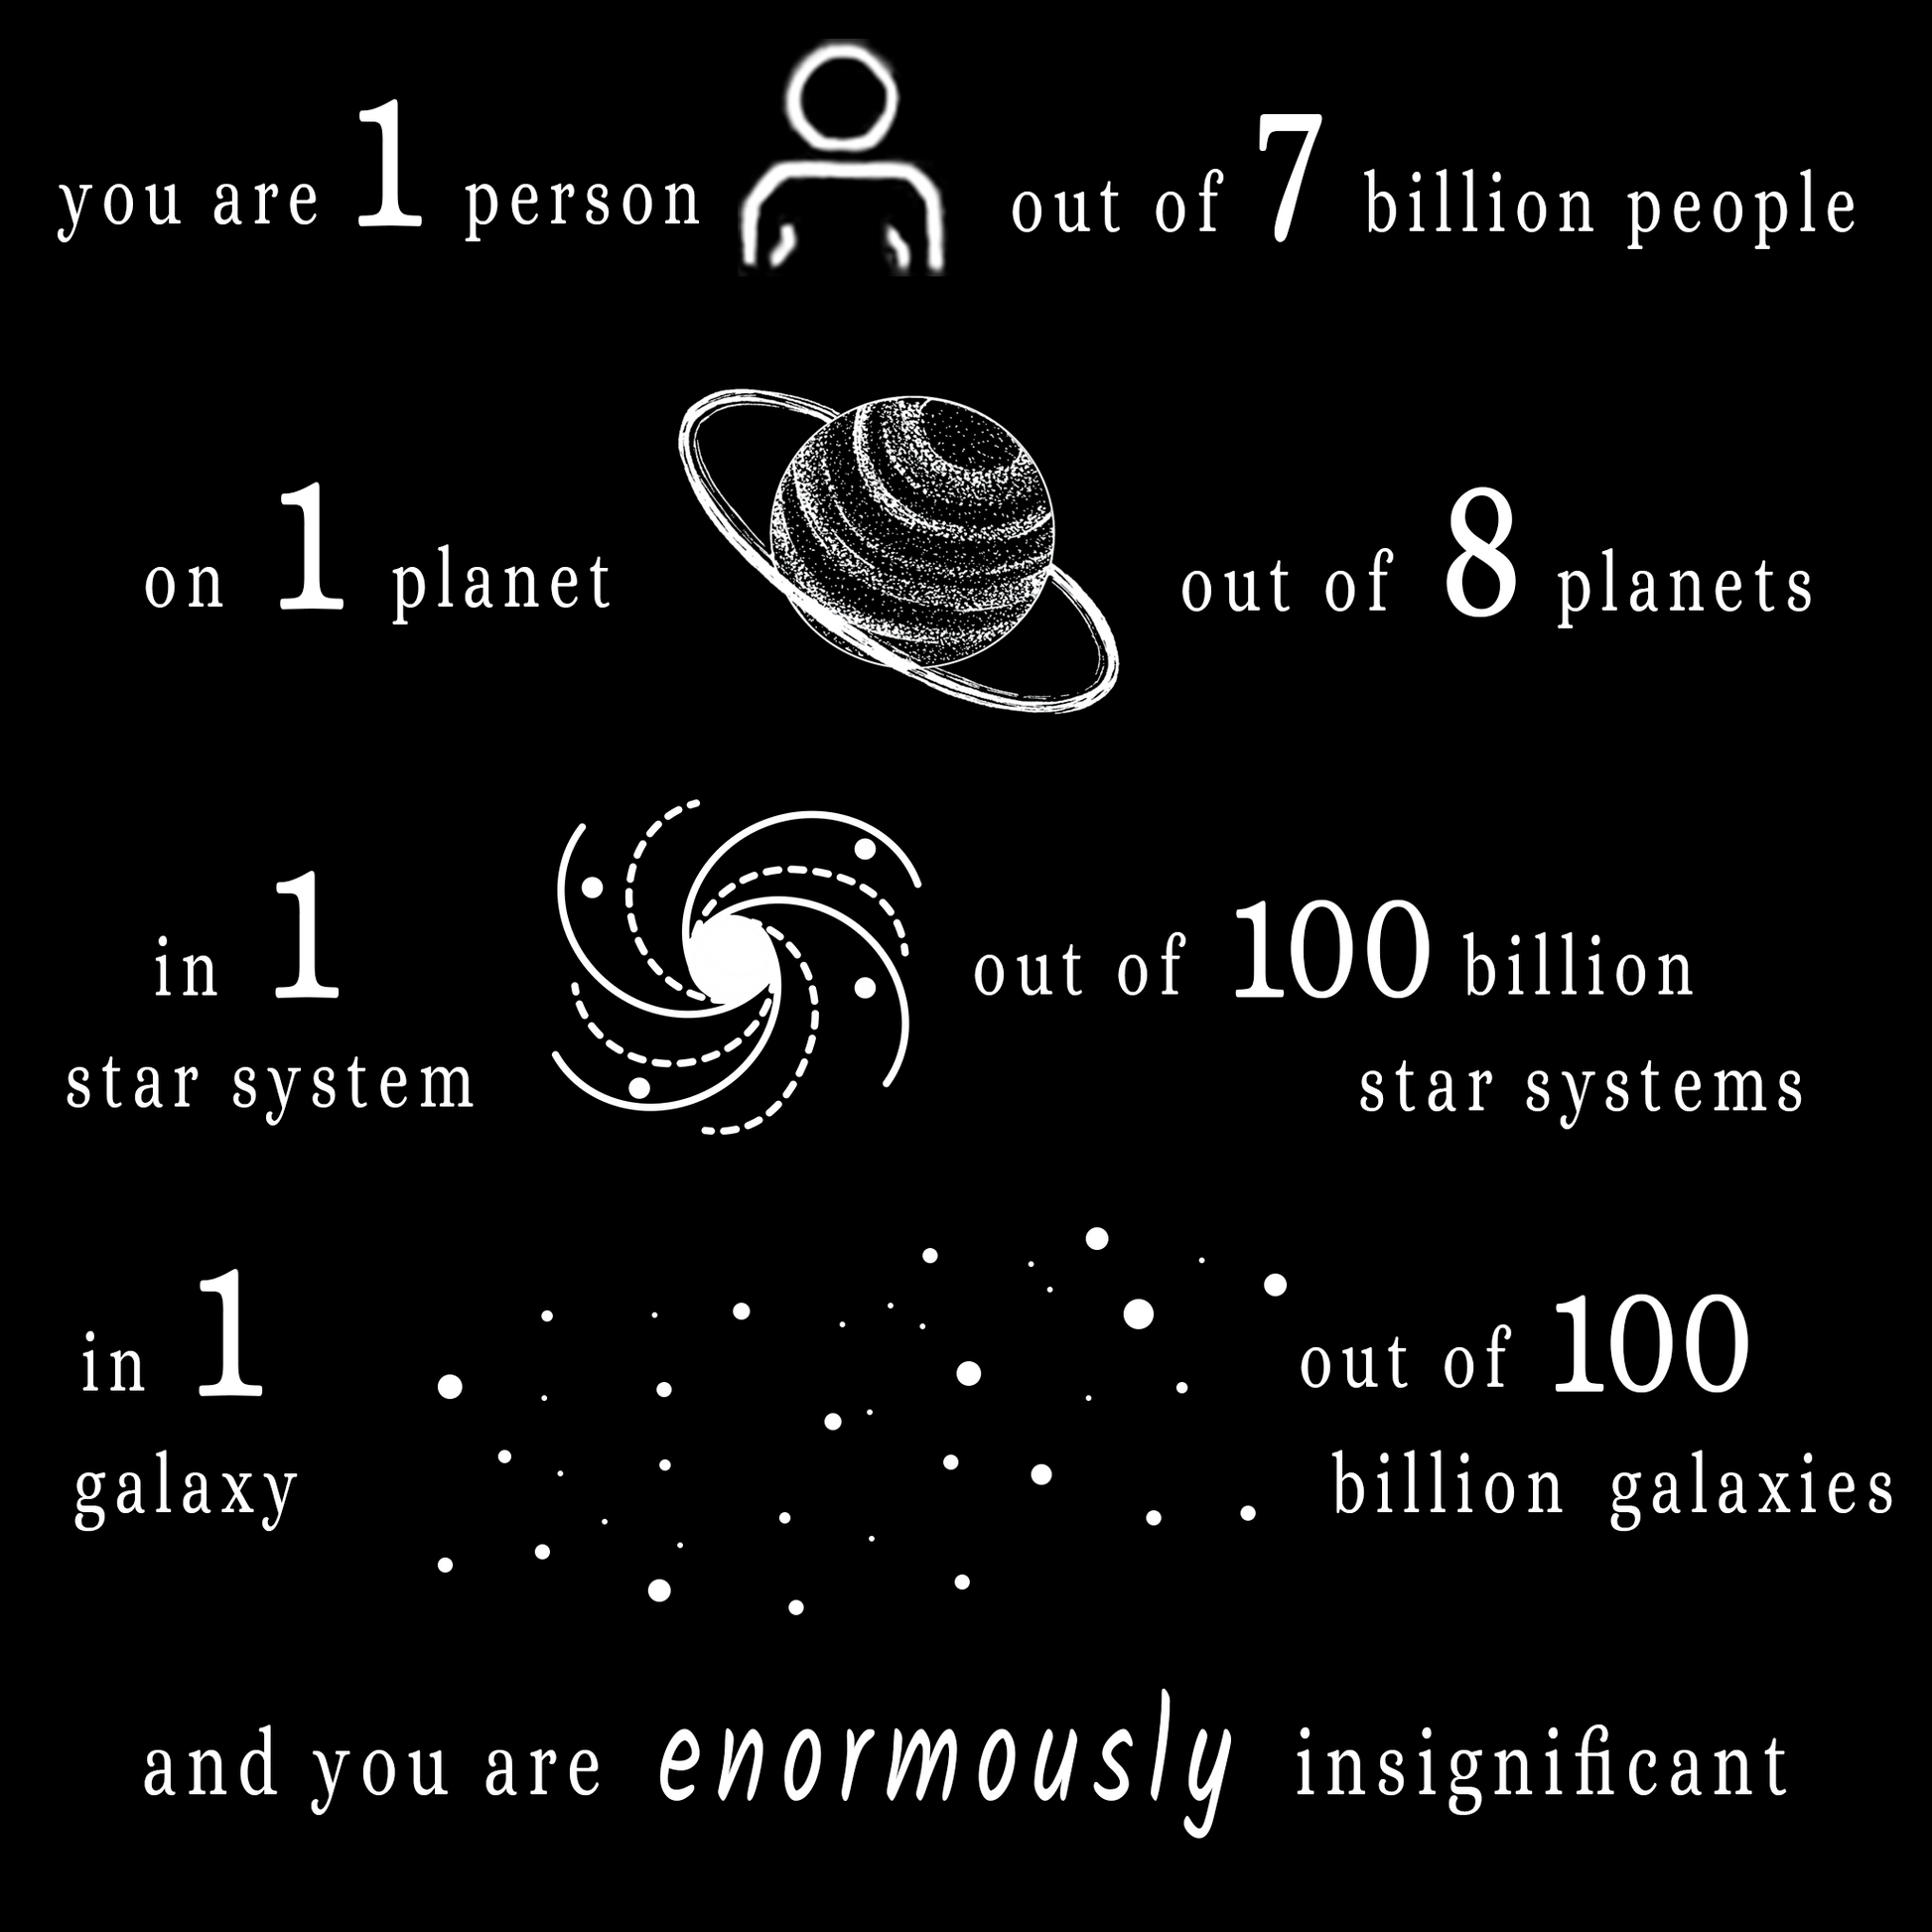 “You are 1 person out of 7 billion people On 1 planet out of 8 planets In 1 star system out of 100 billion star systems In 1 galaxy out of 100 billion galaxies and you are enormously insignificant”